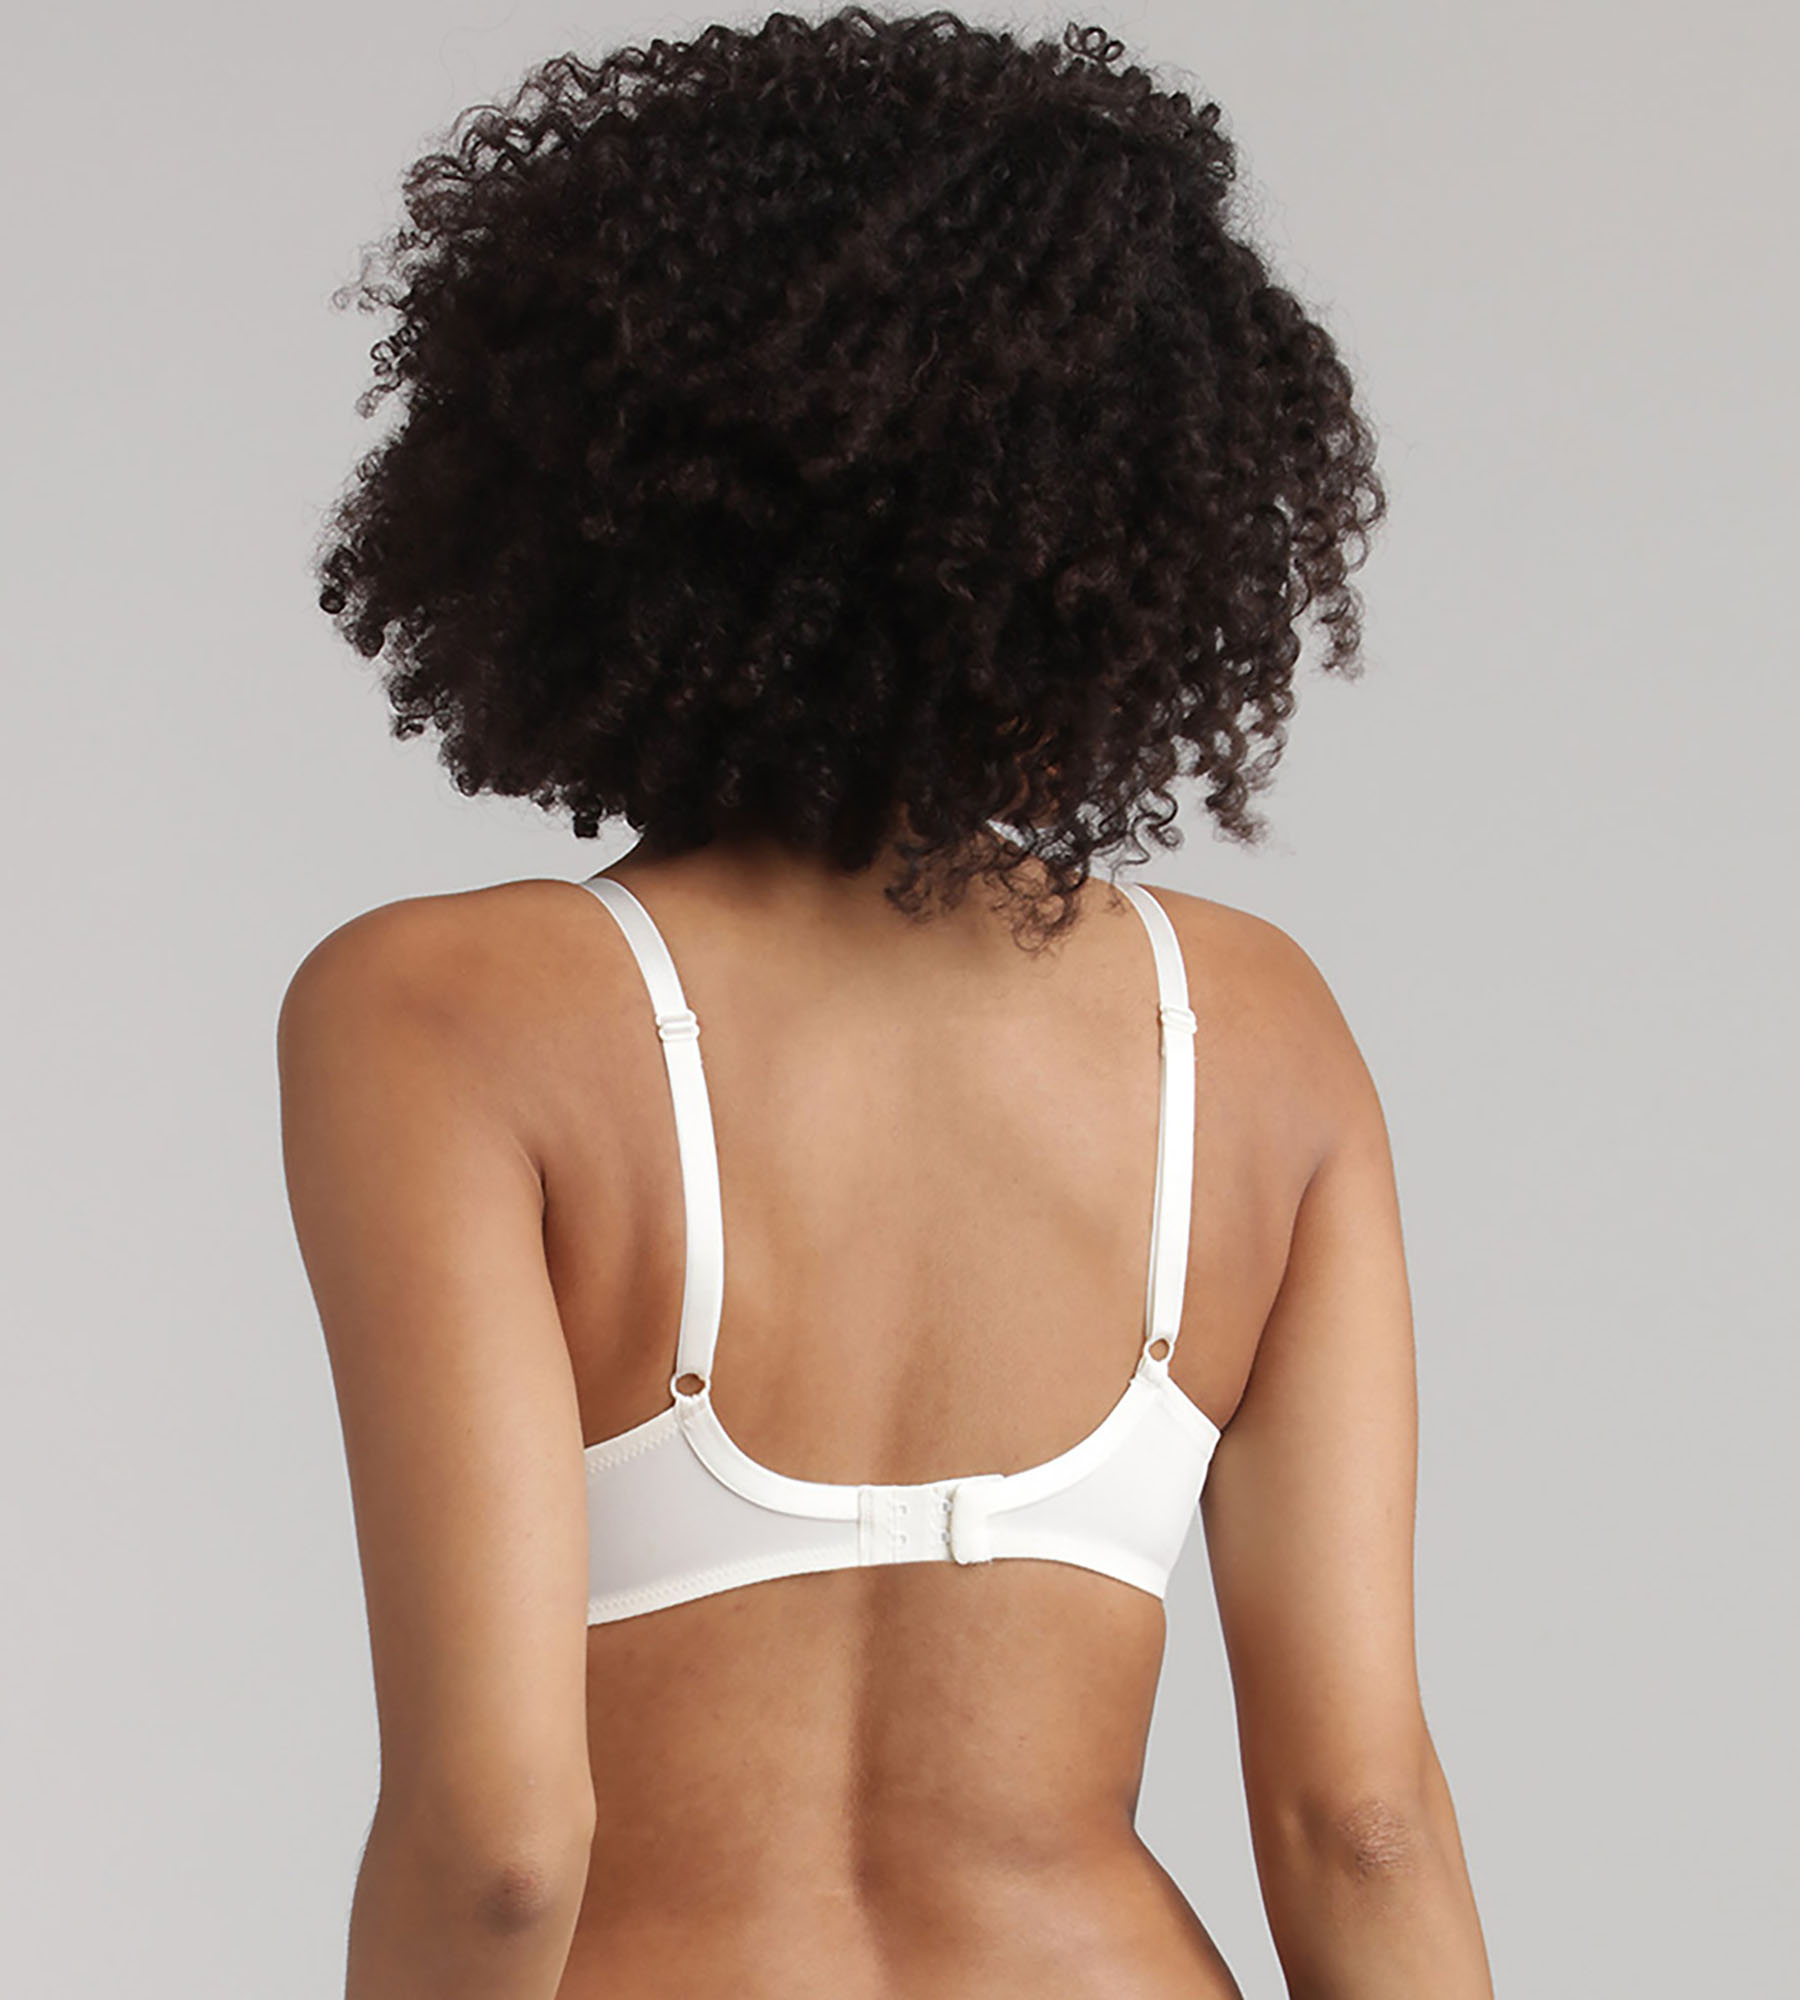 Full Cup Underwired Bra in Ivory - Satiny Micro-Support, , PLAYTEX